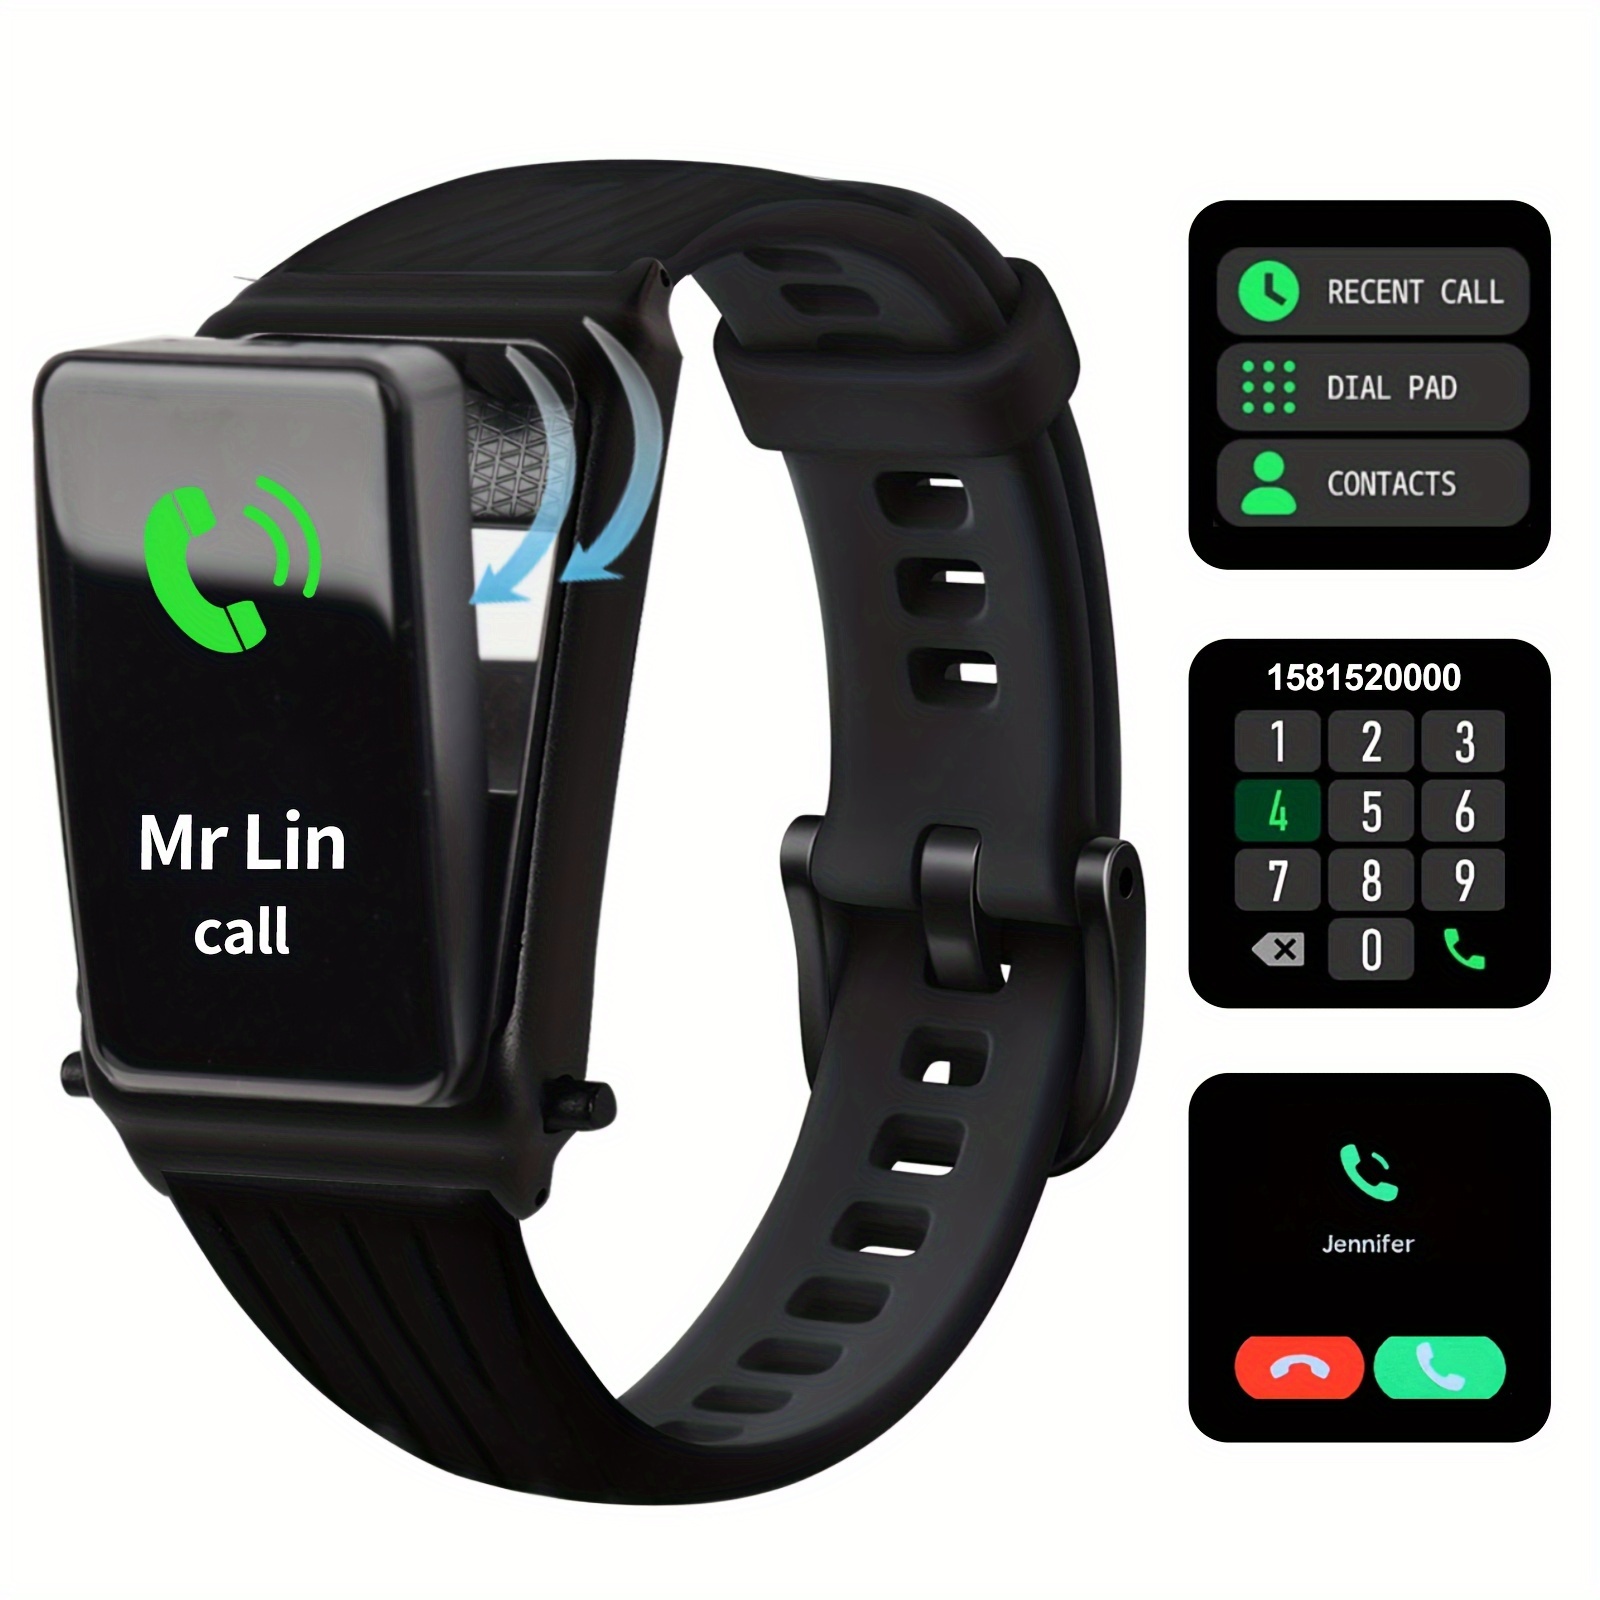 

Smart Watch With Earbuds 2 In 1 Watch With Earbuds For Android Ios